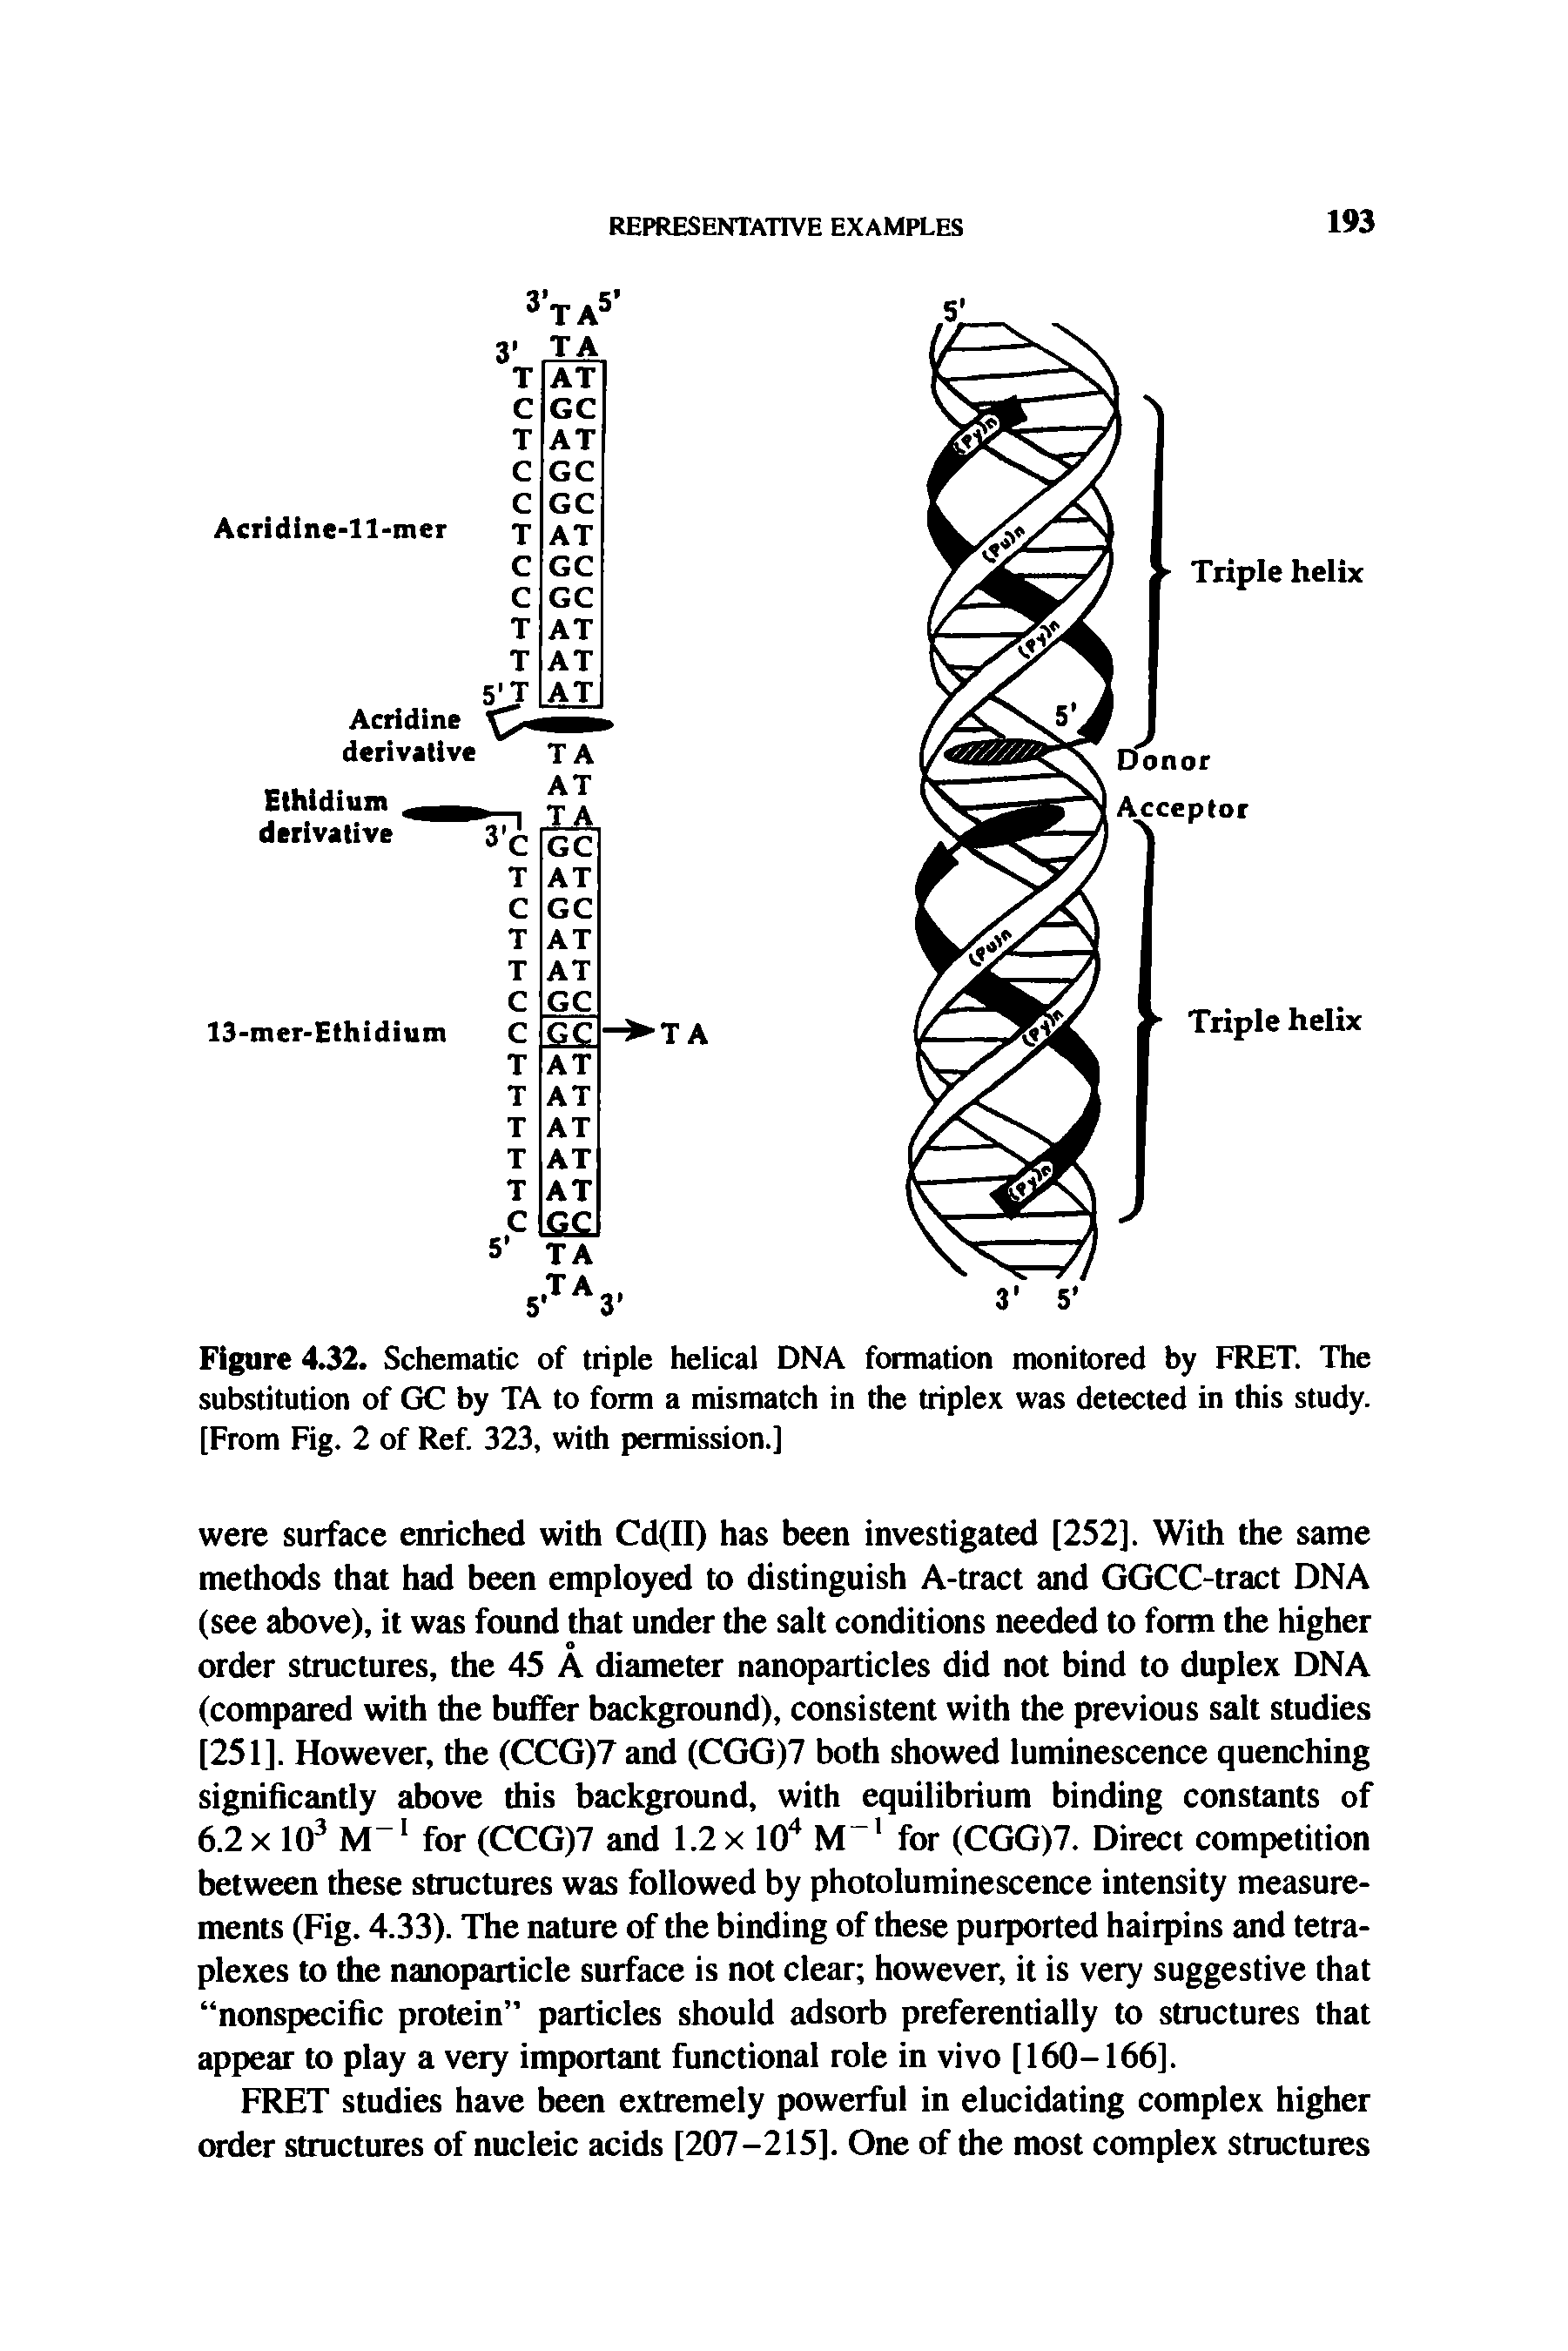 Figure 4.32. Schematic of triple helical DNA formation monitored by FRET. The substitution of GC by TA to form a mismatch in the triplex was detected in this study. [From Fig. 2 of Ref. 323, with permission.]...